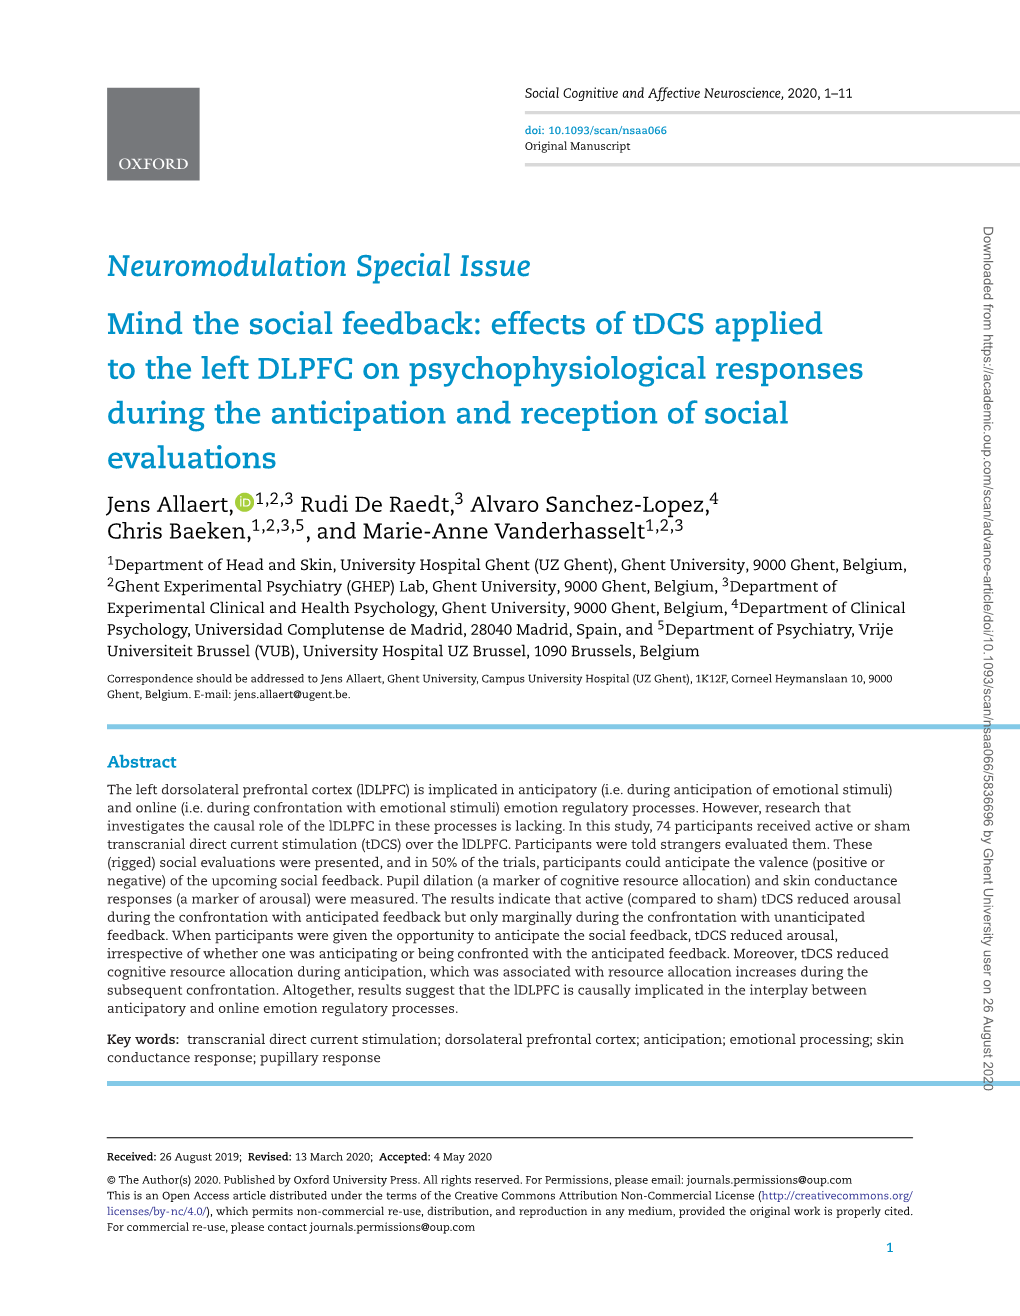 Neuromodulation Special Issue Mind the Social Feedback